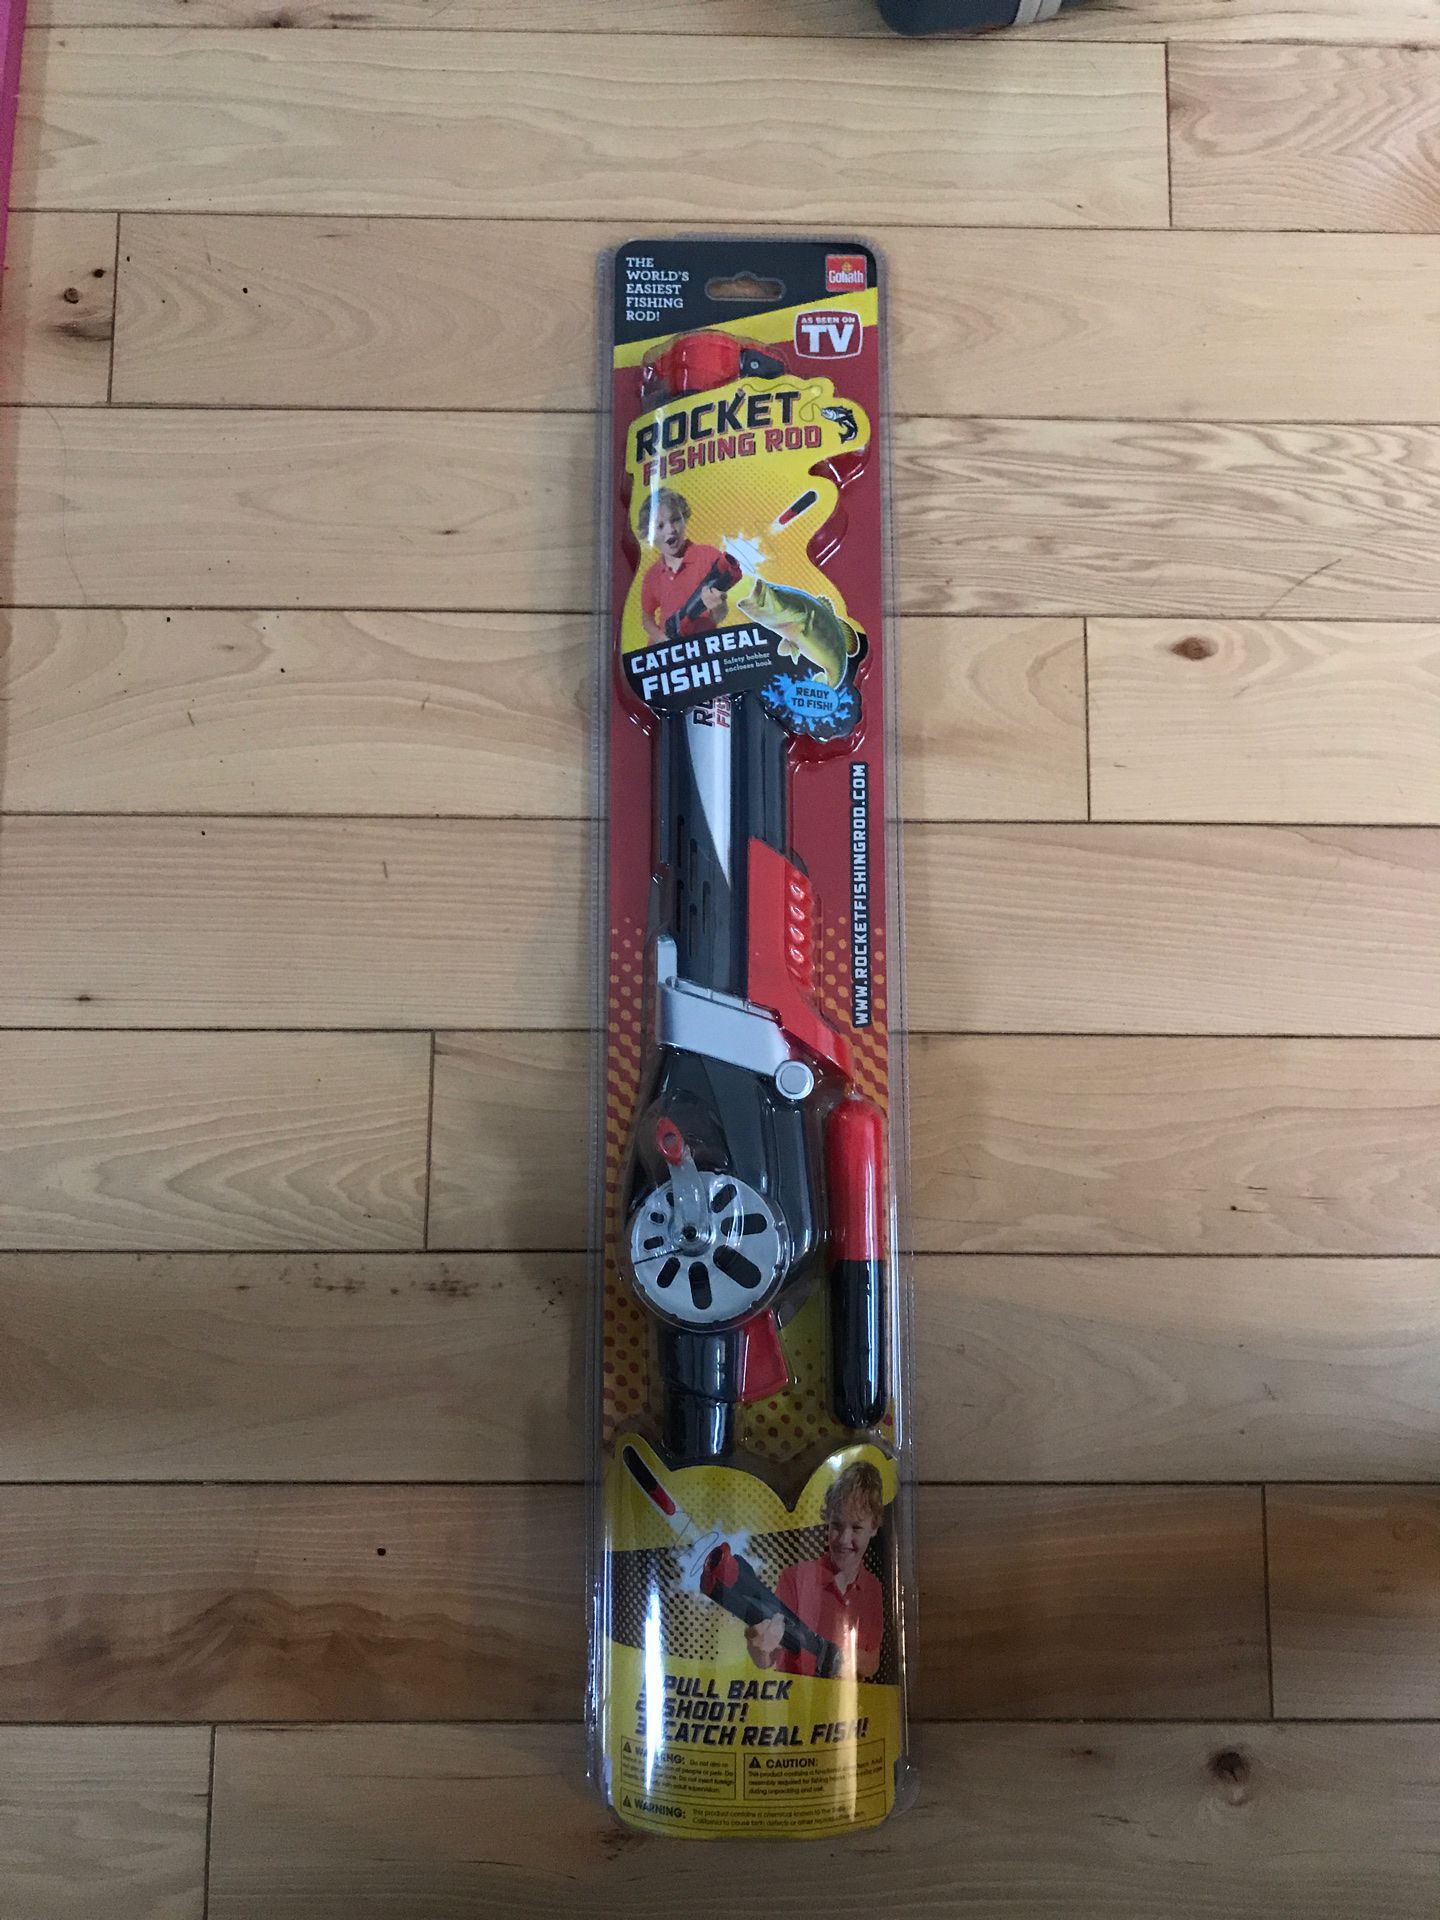 Brand new rocket fishing rod, ages 8+, retails for $65